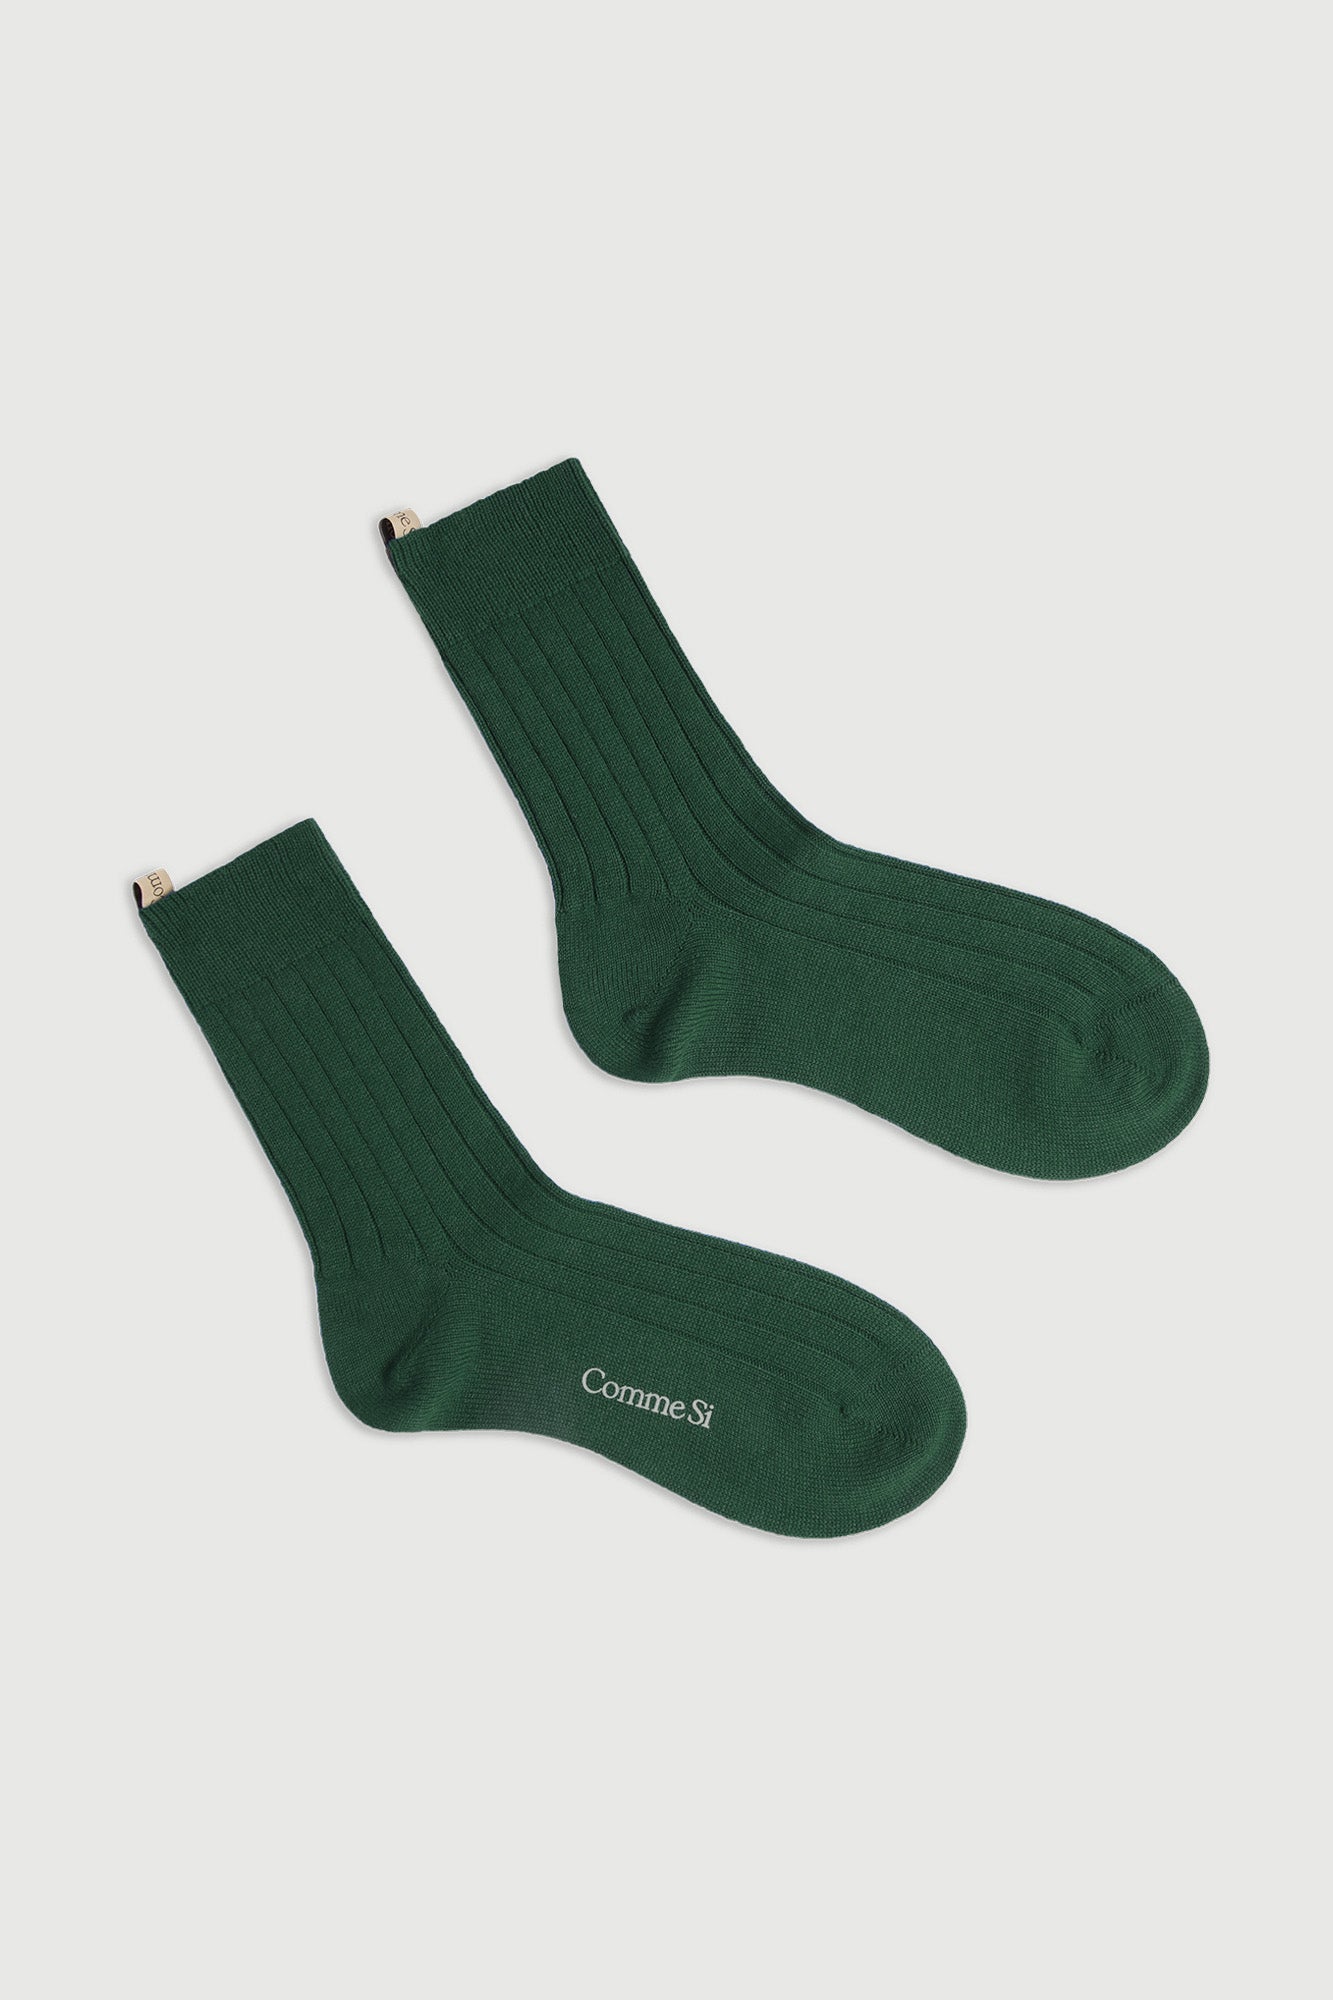 The Danielle Sock, Mongolian Cashmere, Forest, Comme Si